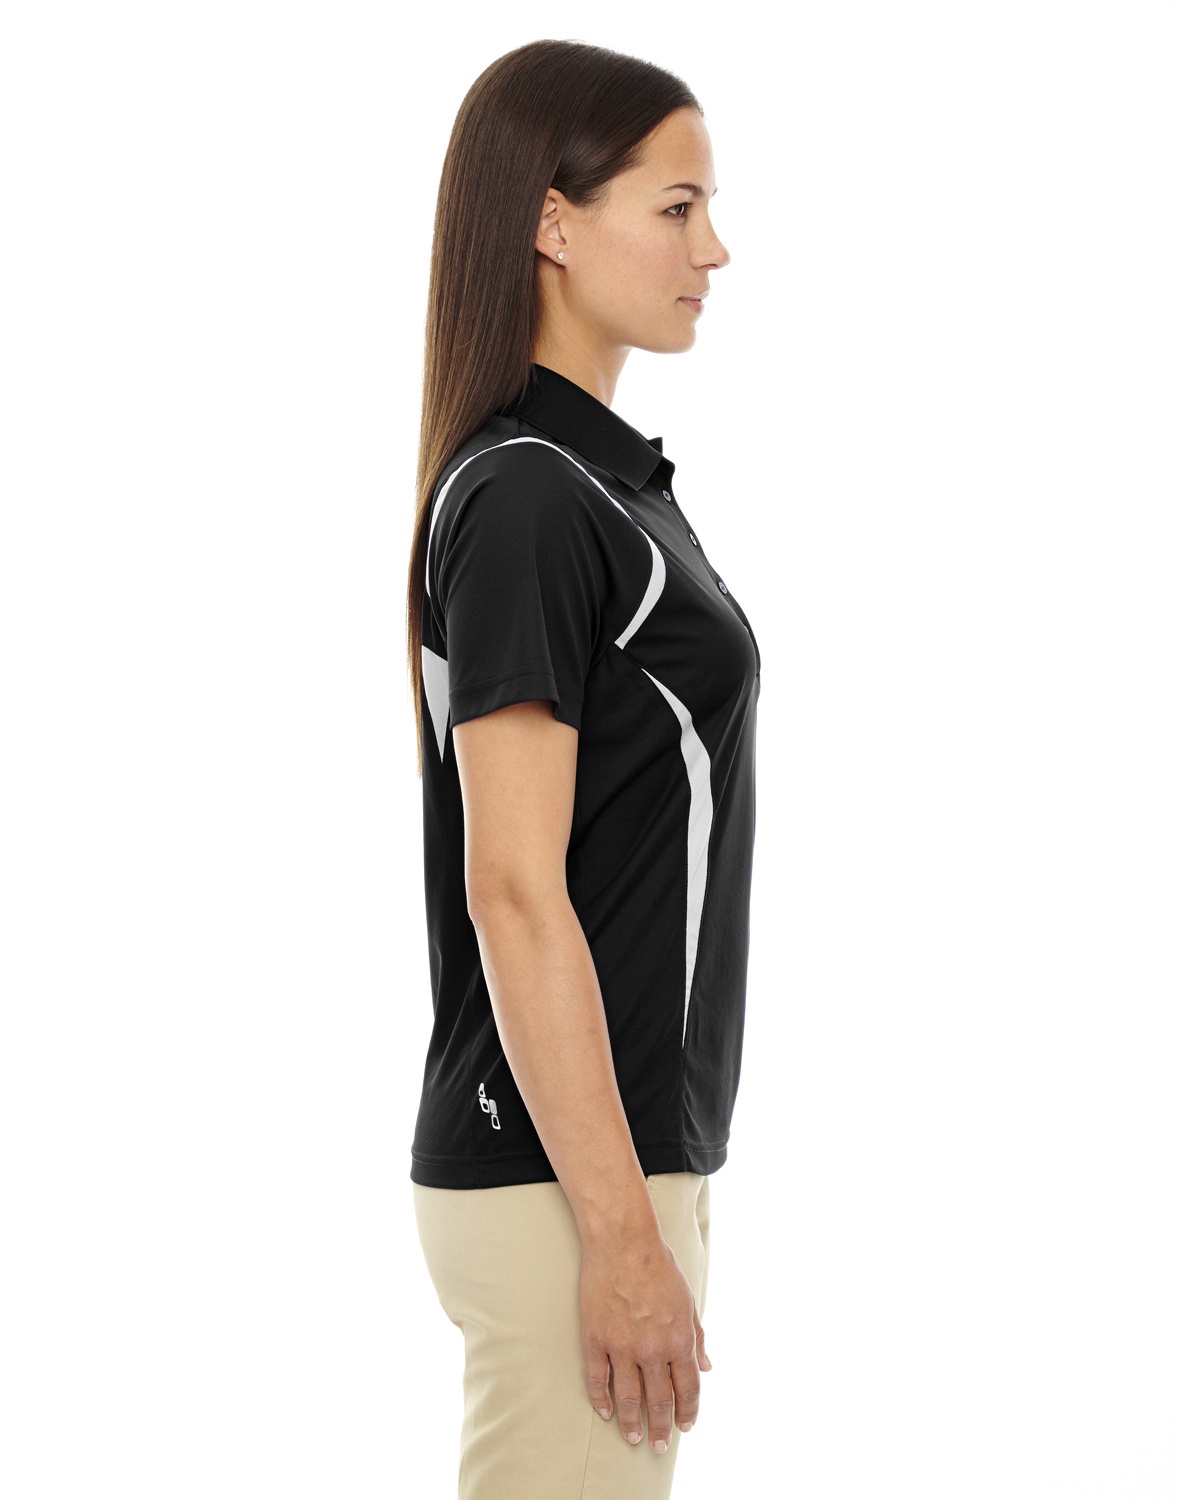 'Ash City - Extreme 75109 Ladies' Eperformance Venture Snag Protection Polo'